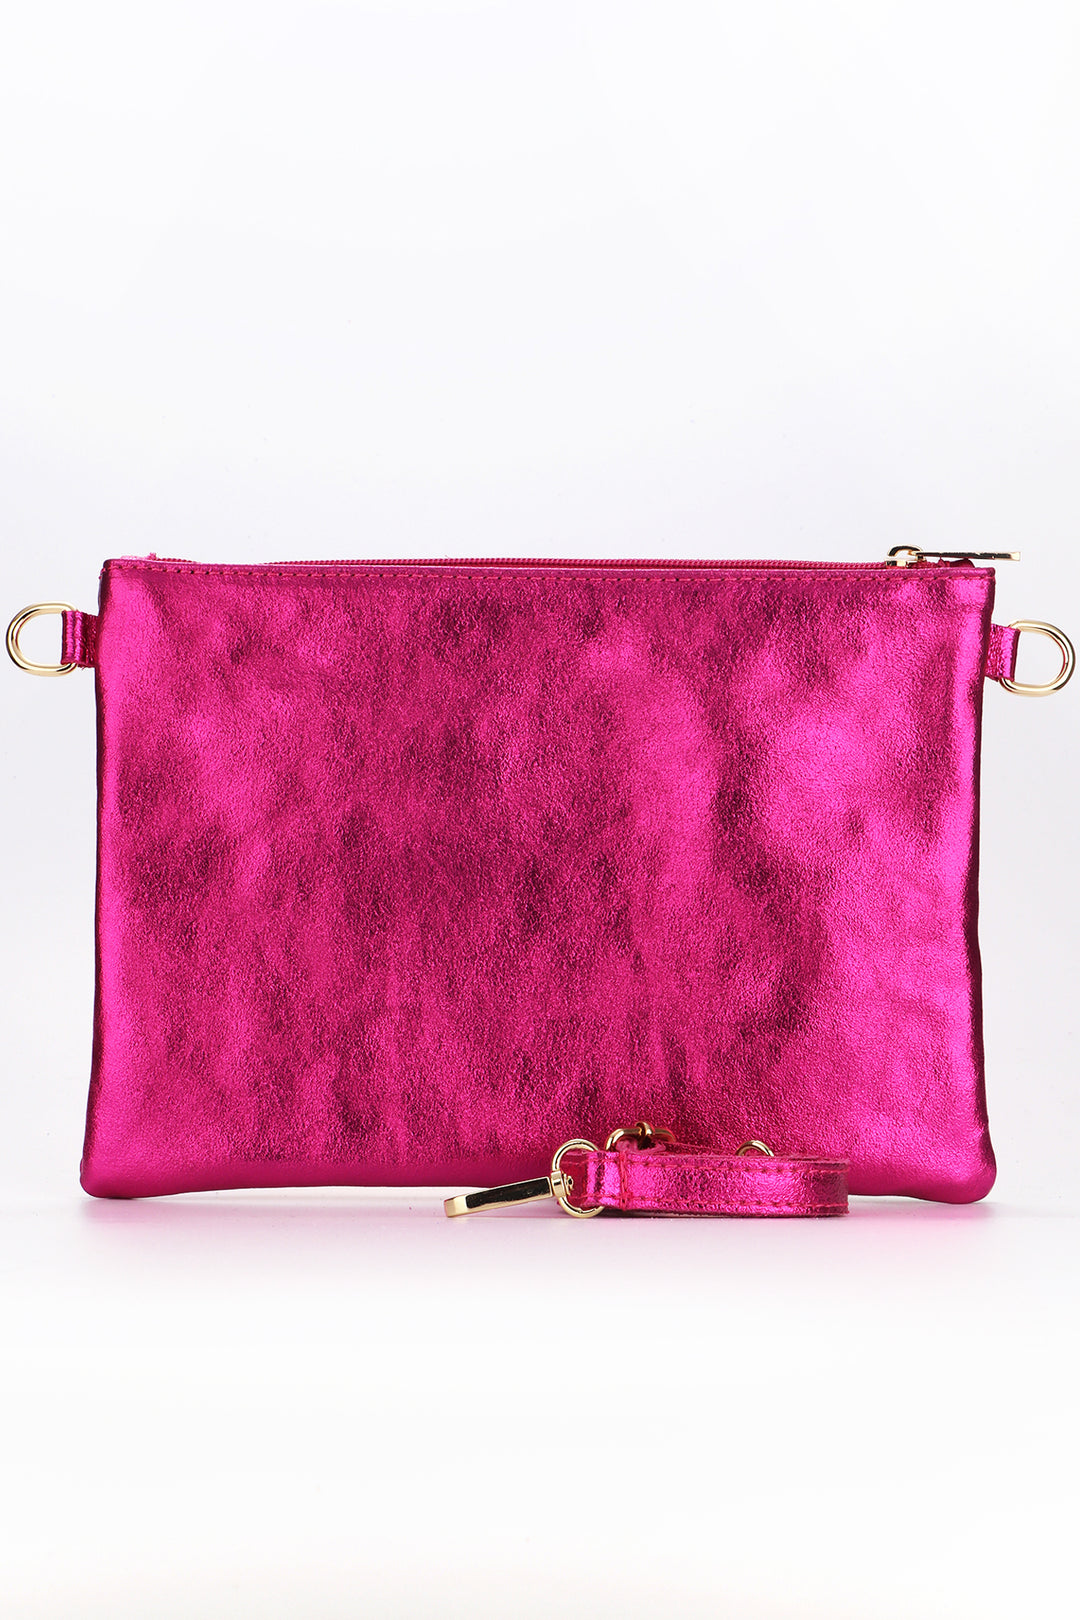 the back of the wristlet clutch is metallic fuchsia pink